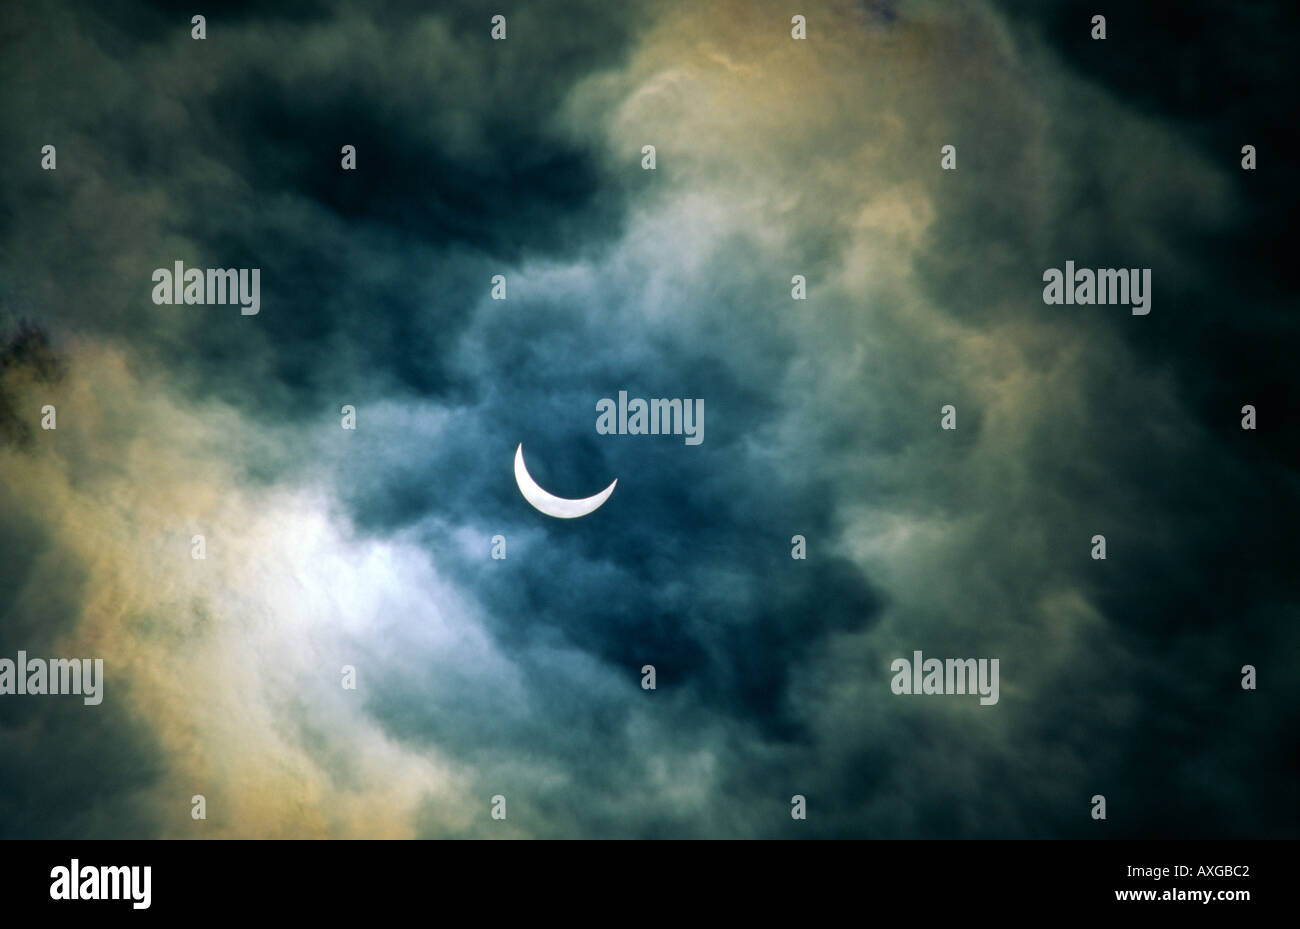 Solar eclipse. Moon passing in front of sun approaching full eclipse.  Romantic atmosphere veiled by thin stormy clearing cloud Stock Photo